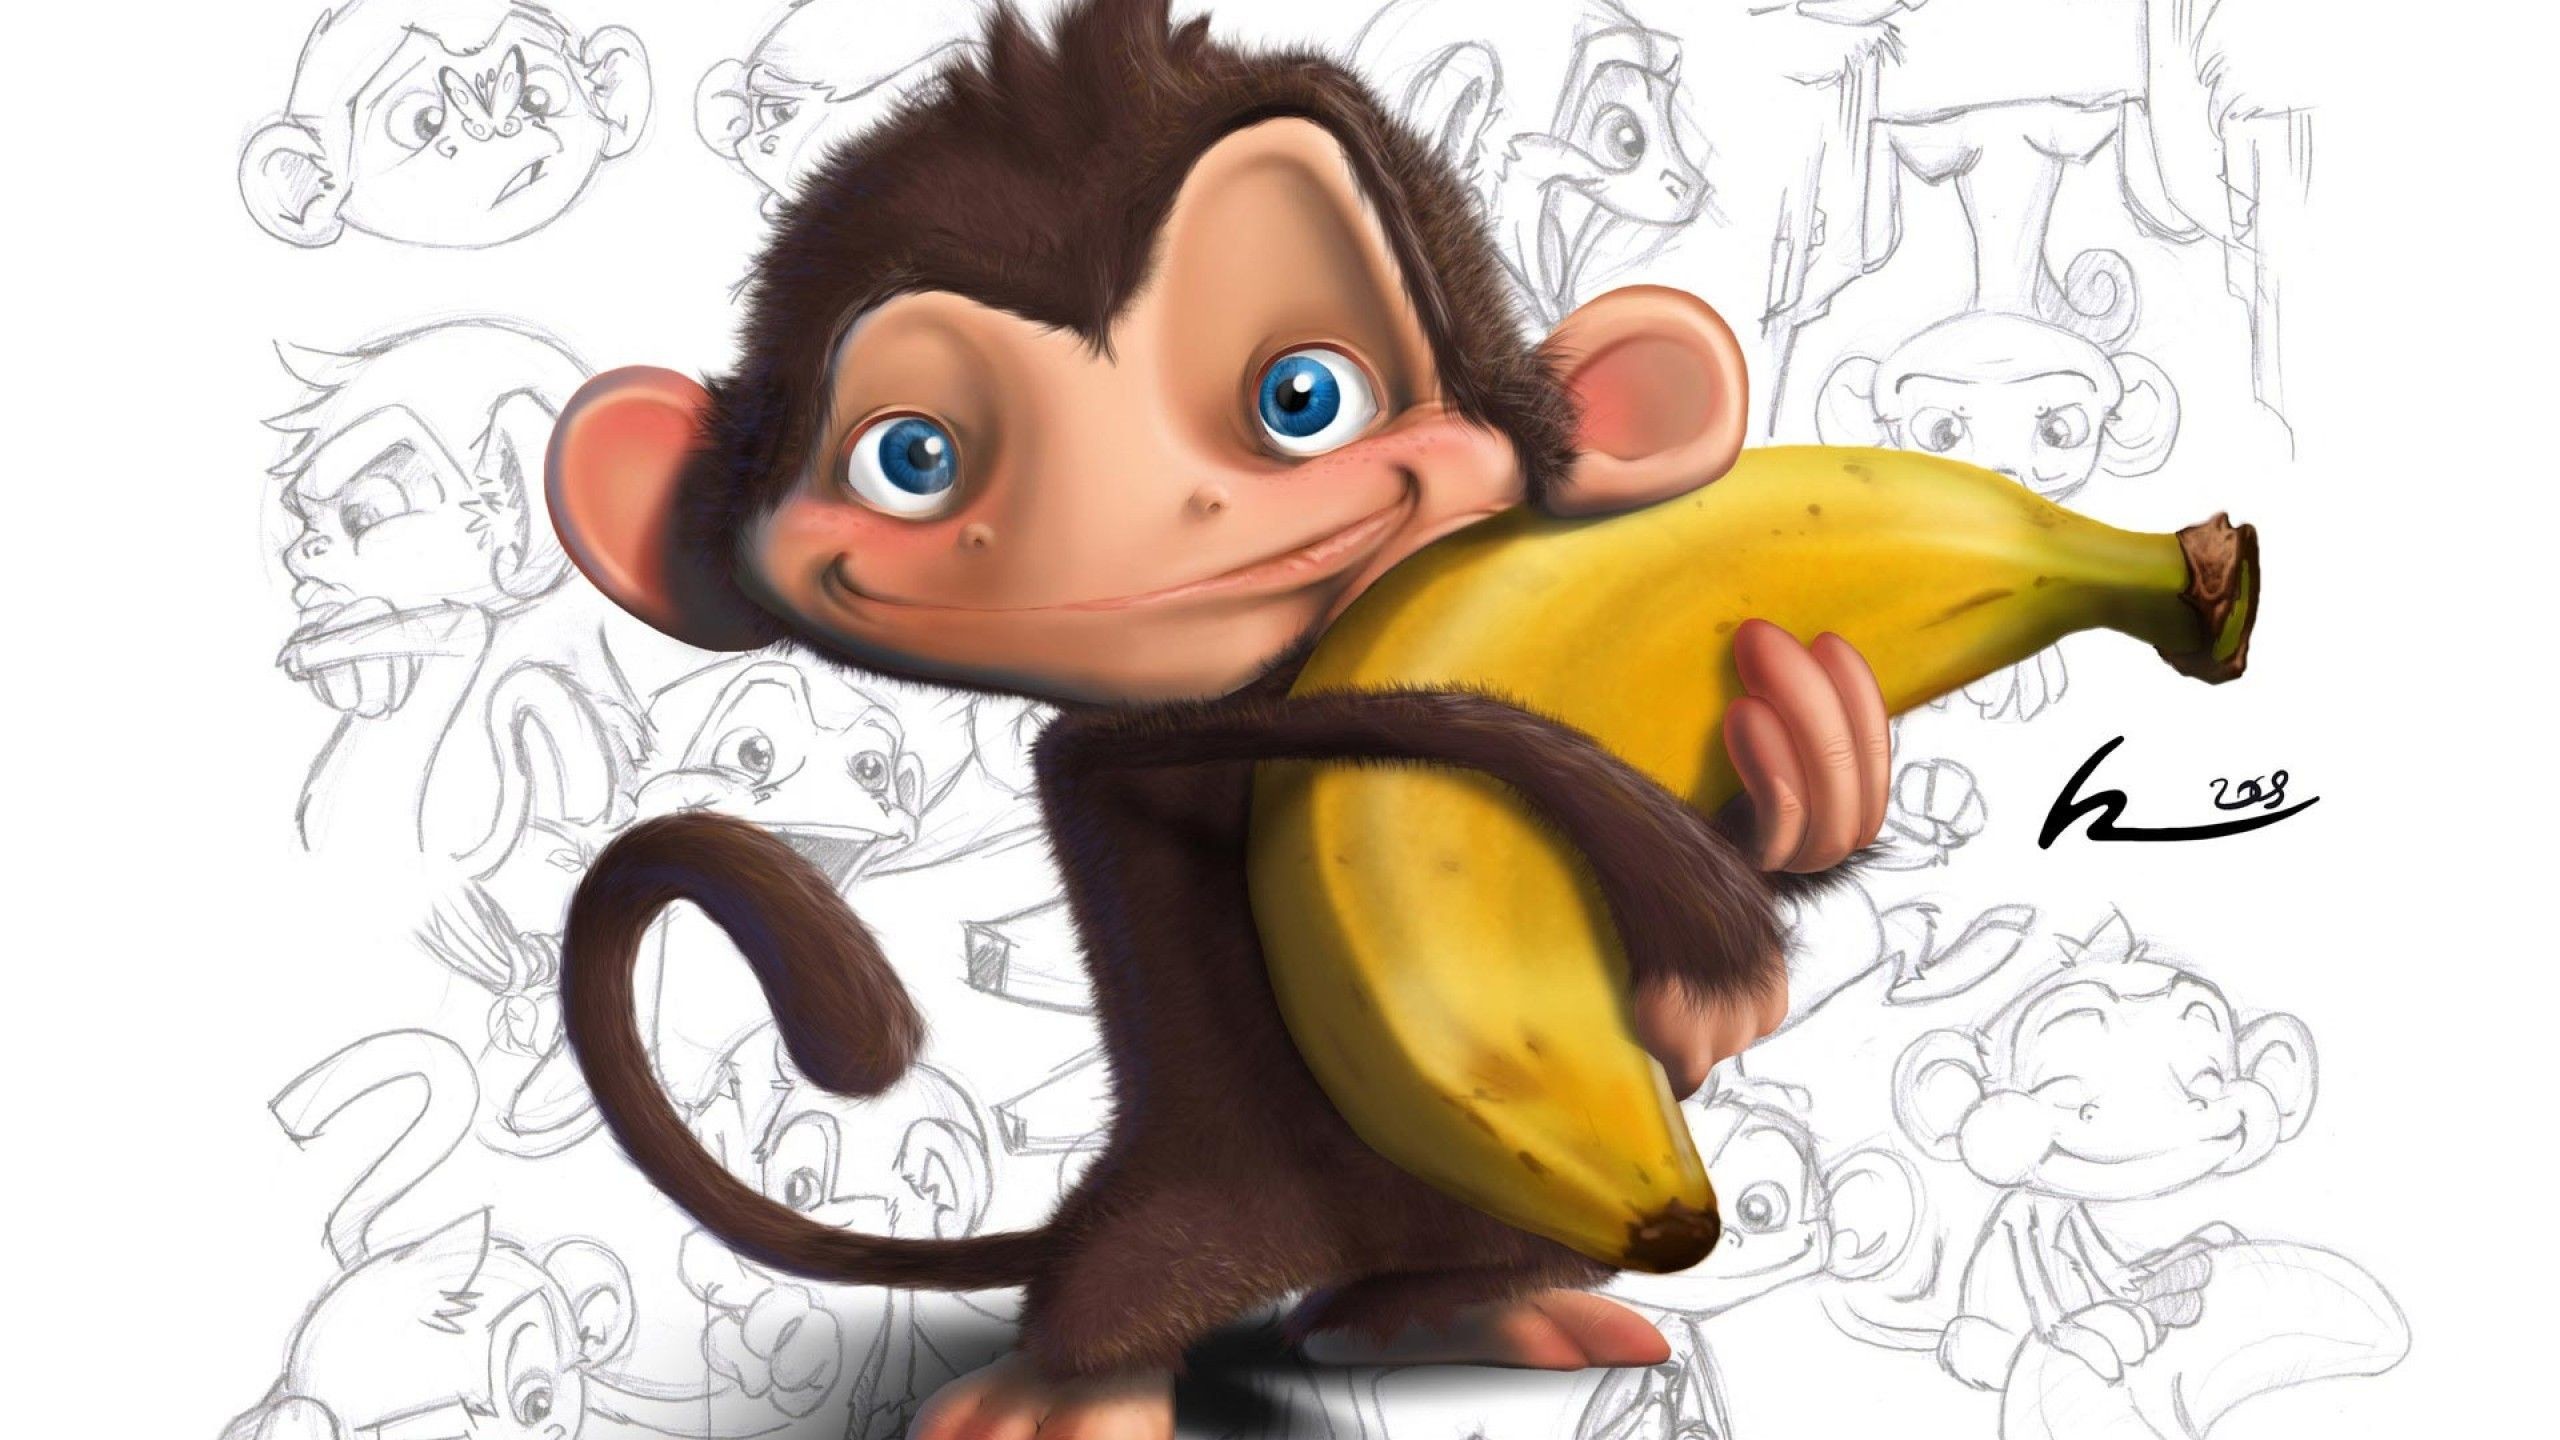 Other: Banana Love Monkey Funny Cartoon Cute Pets Free Wallpapers .